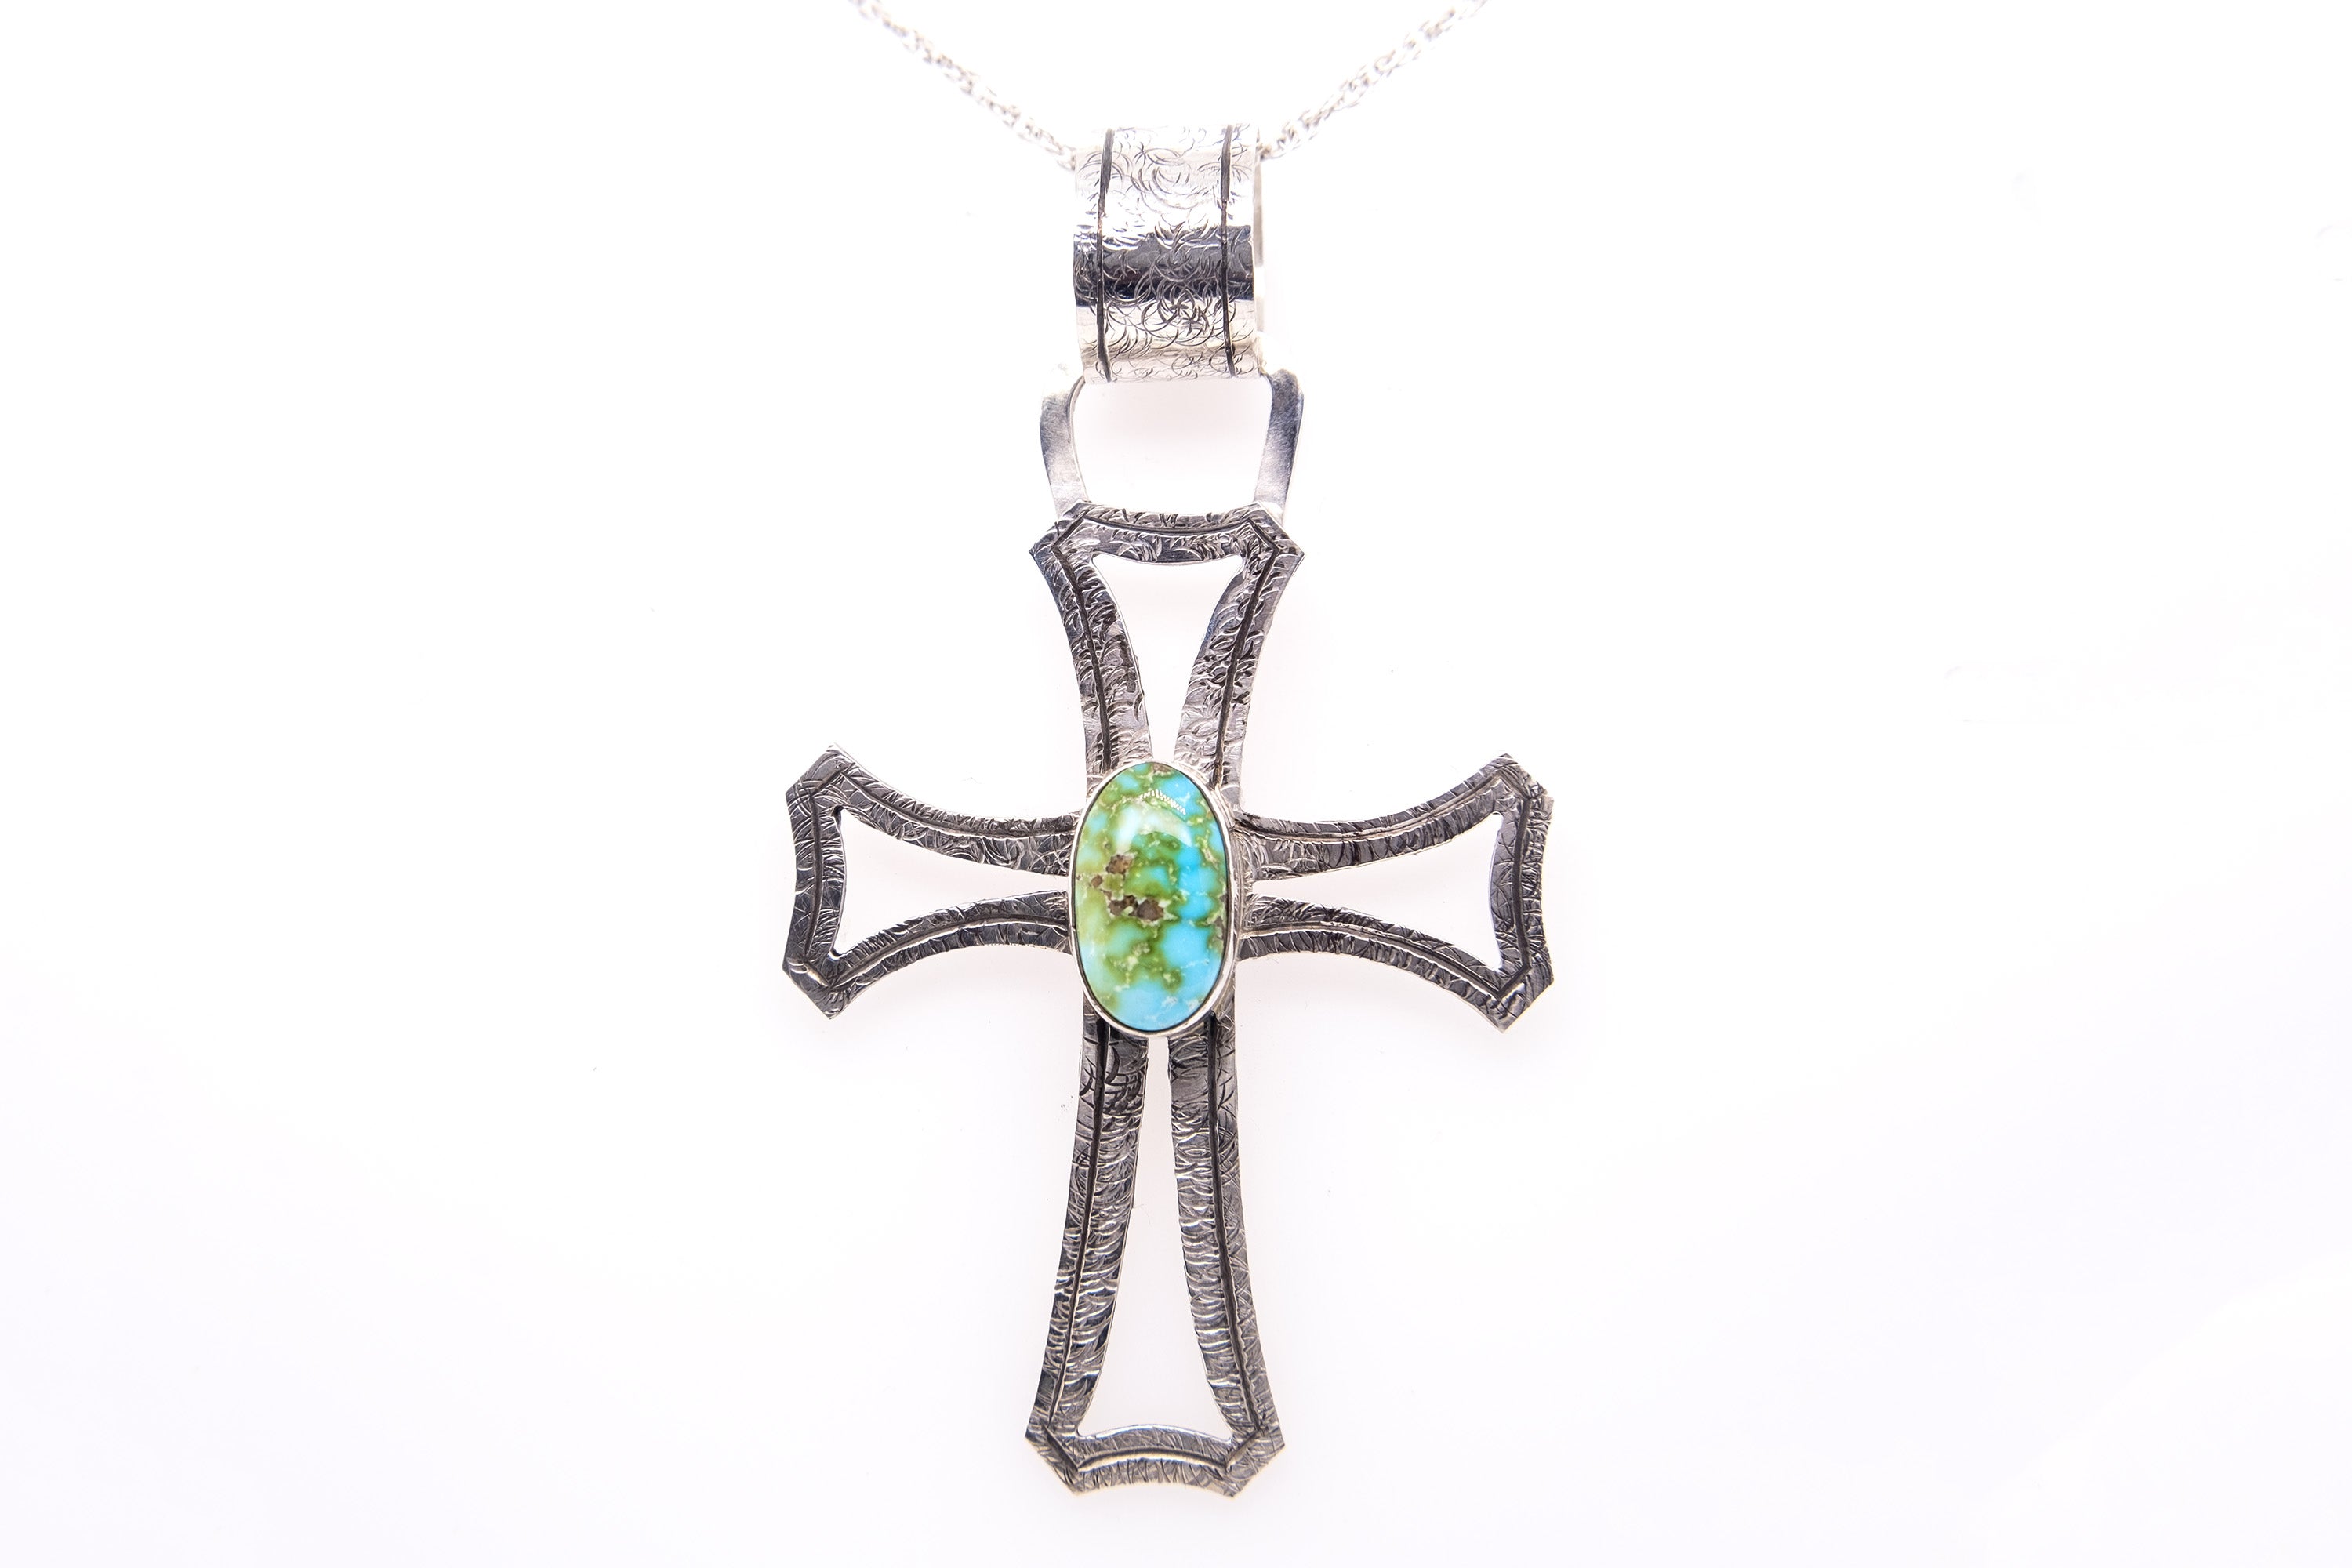 Sonoran Gold Turquoise Cross Pendant by Gary Glandon